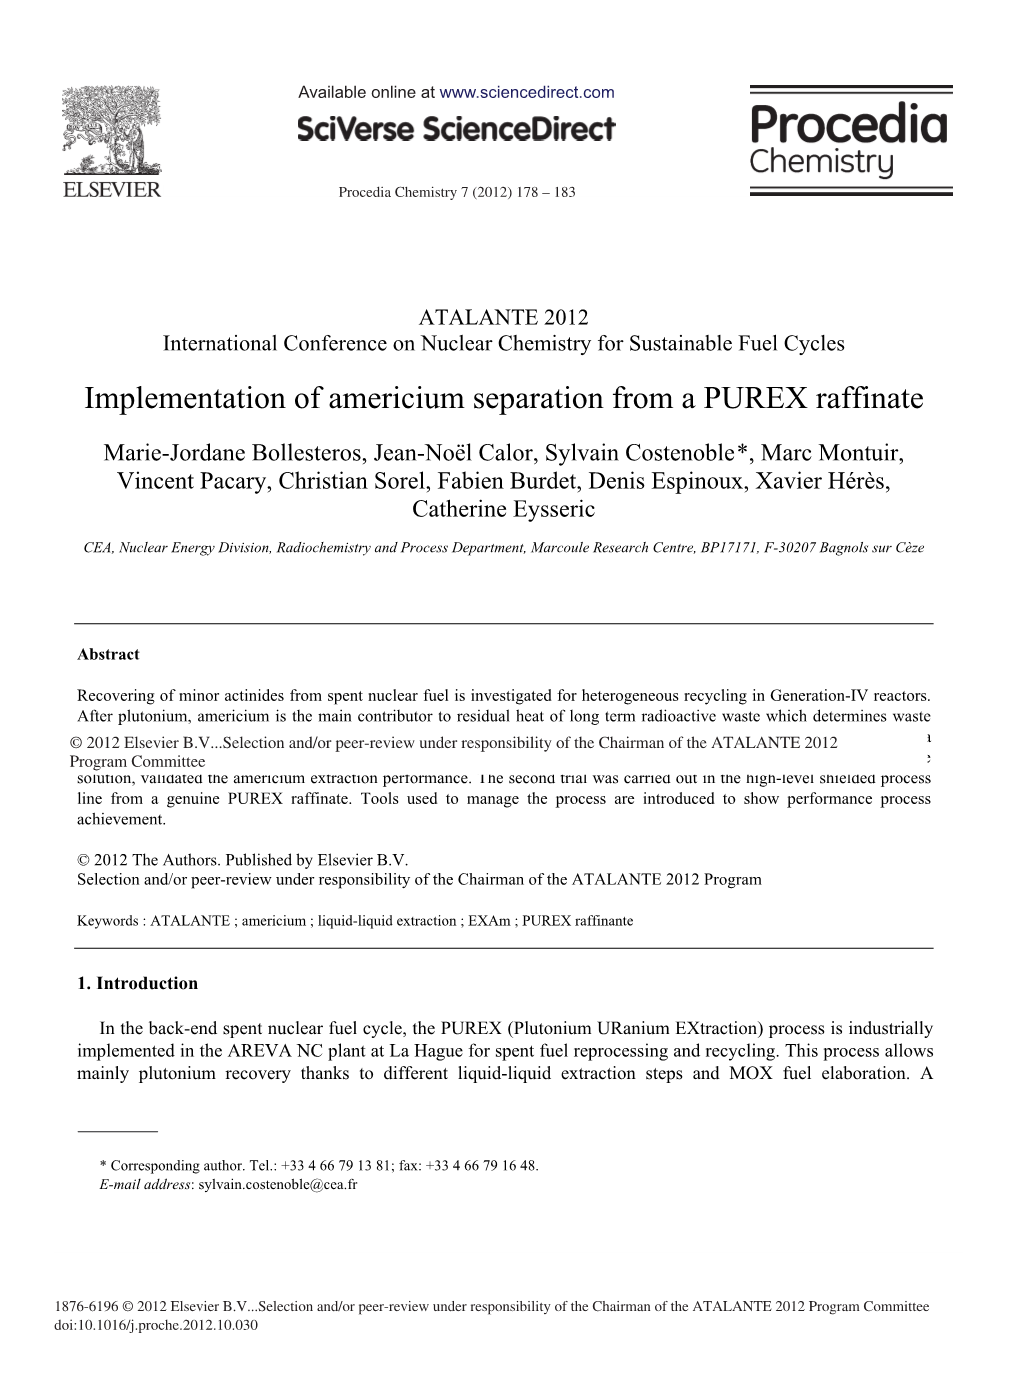 Implementation of Americium Separation from a PUREX Raffinate